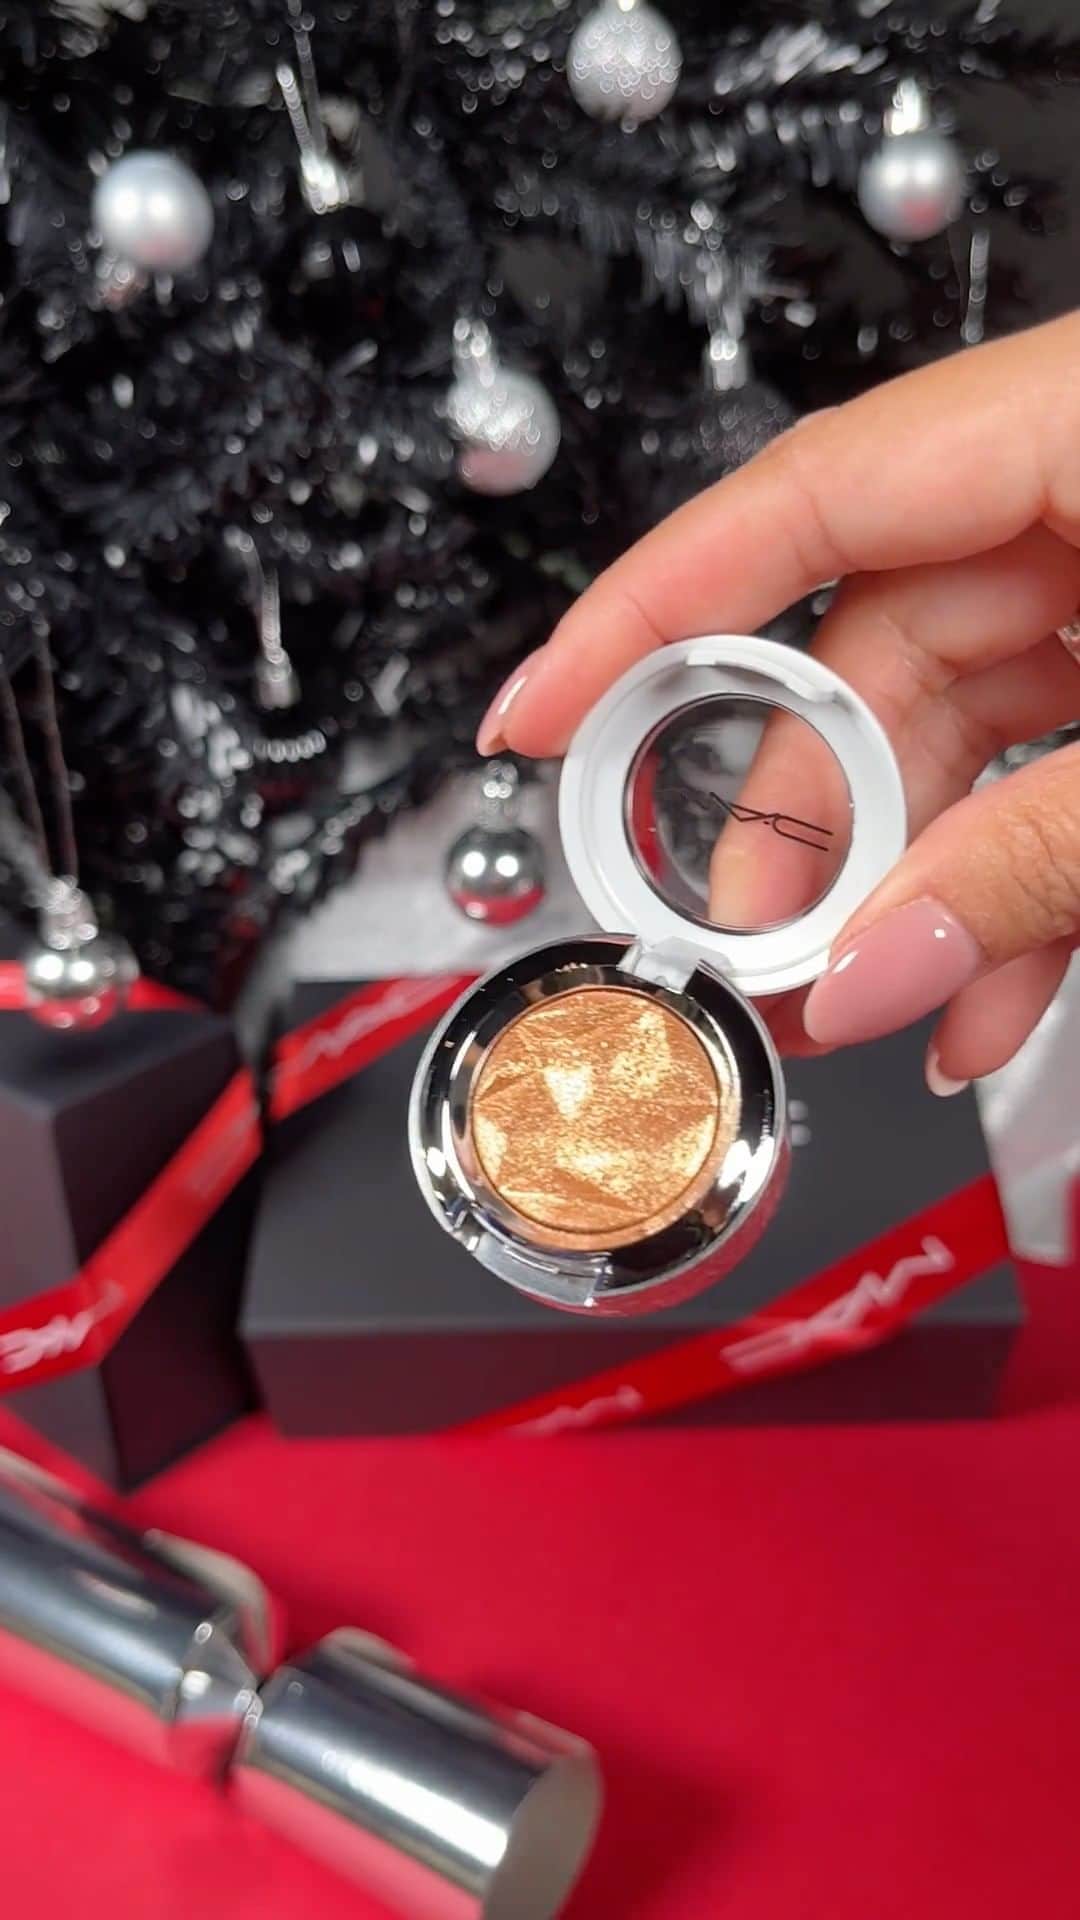 M·A·C Cosmetics UK & Irelandのインスタグラム：「POV: You rigged the cracker to secure the prize 🎁  Be sure to get your hands on our limited-edition Sparkler Eyeshadow in Gold Crush ✨ The creamy, buildable formula glides on smoothly so your lids glisten with ample sparkle. Each is ready to gift in christmas-exclusive snowy white and shiny chrome packaging.   Click the link in bio to shop NOW!  #MACCosmeticsUK #MACBizarreBlizzardBash #MACHoliday」